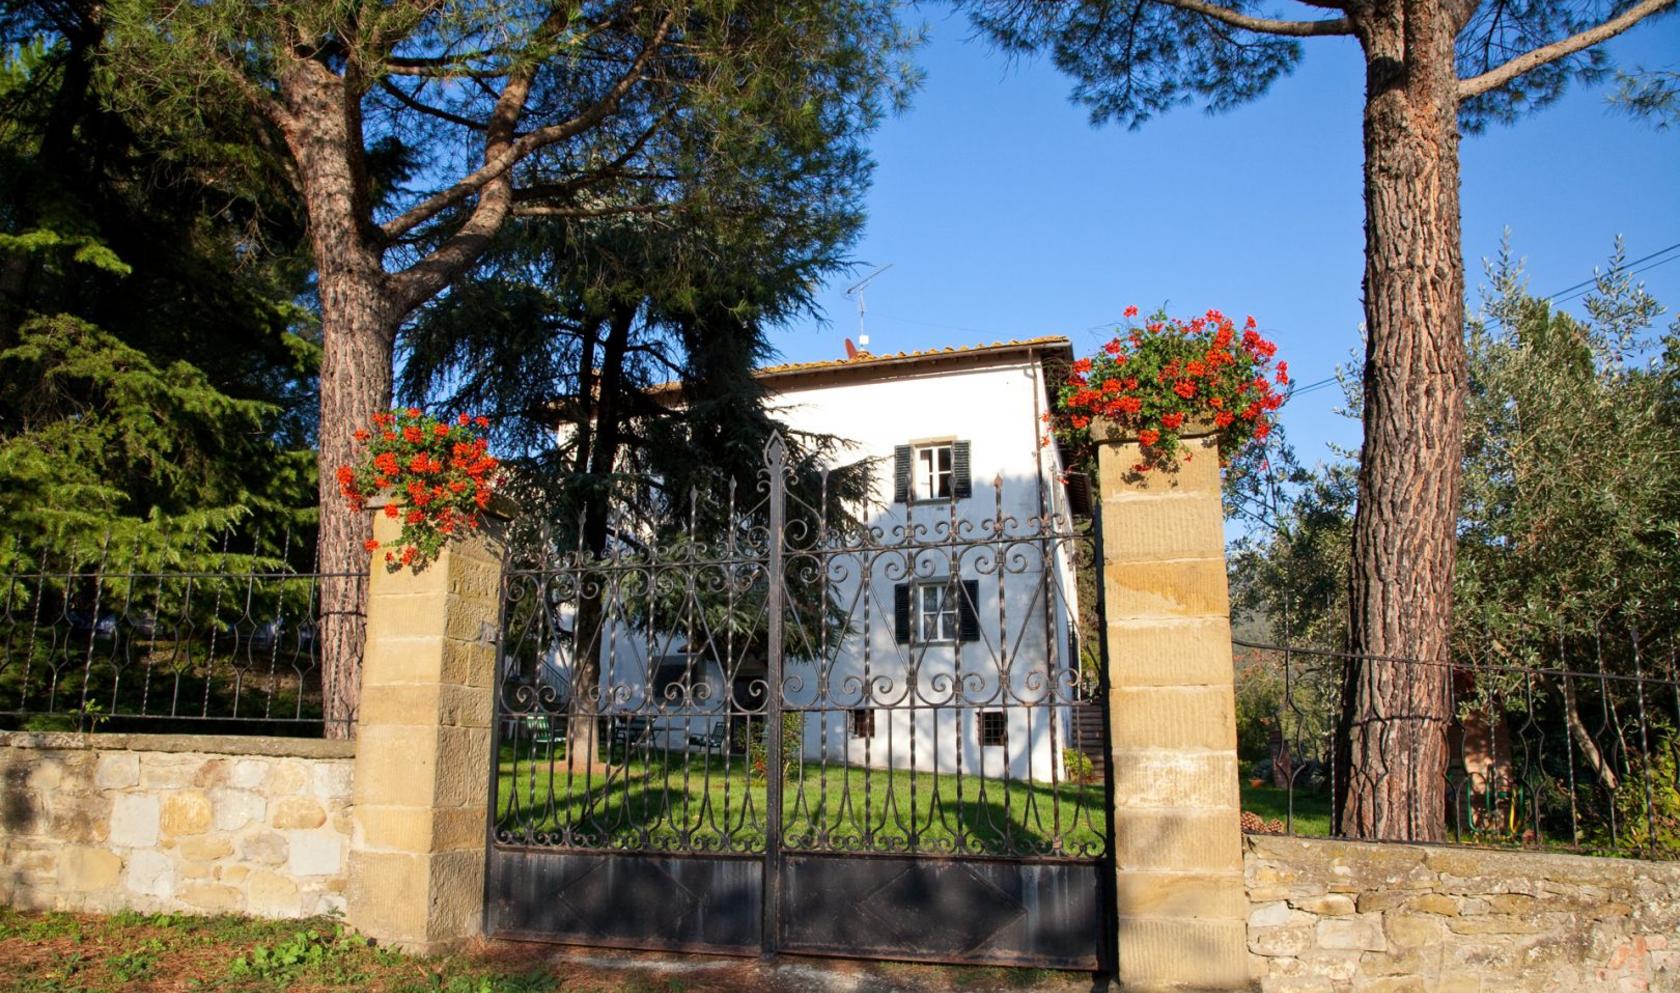 Toscana Immobiliare - Luxury Villa for sale in Tuscany with stone restored farmhouse, gardens, church, swimming pool